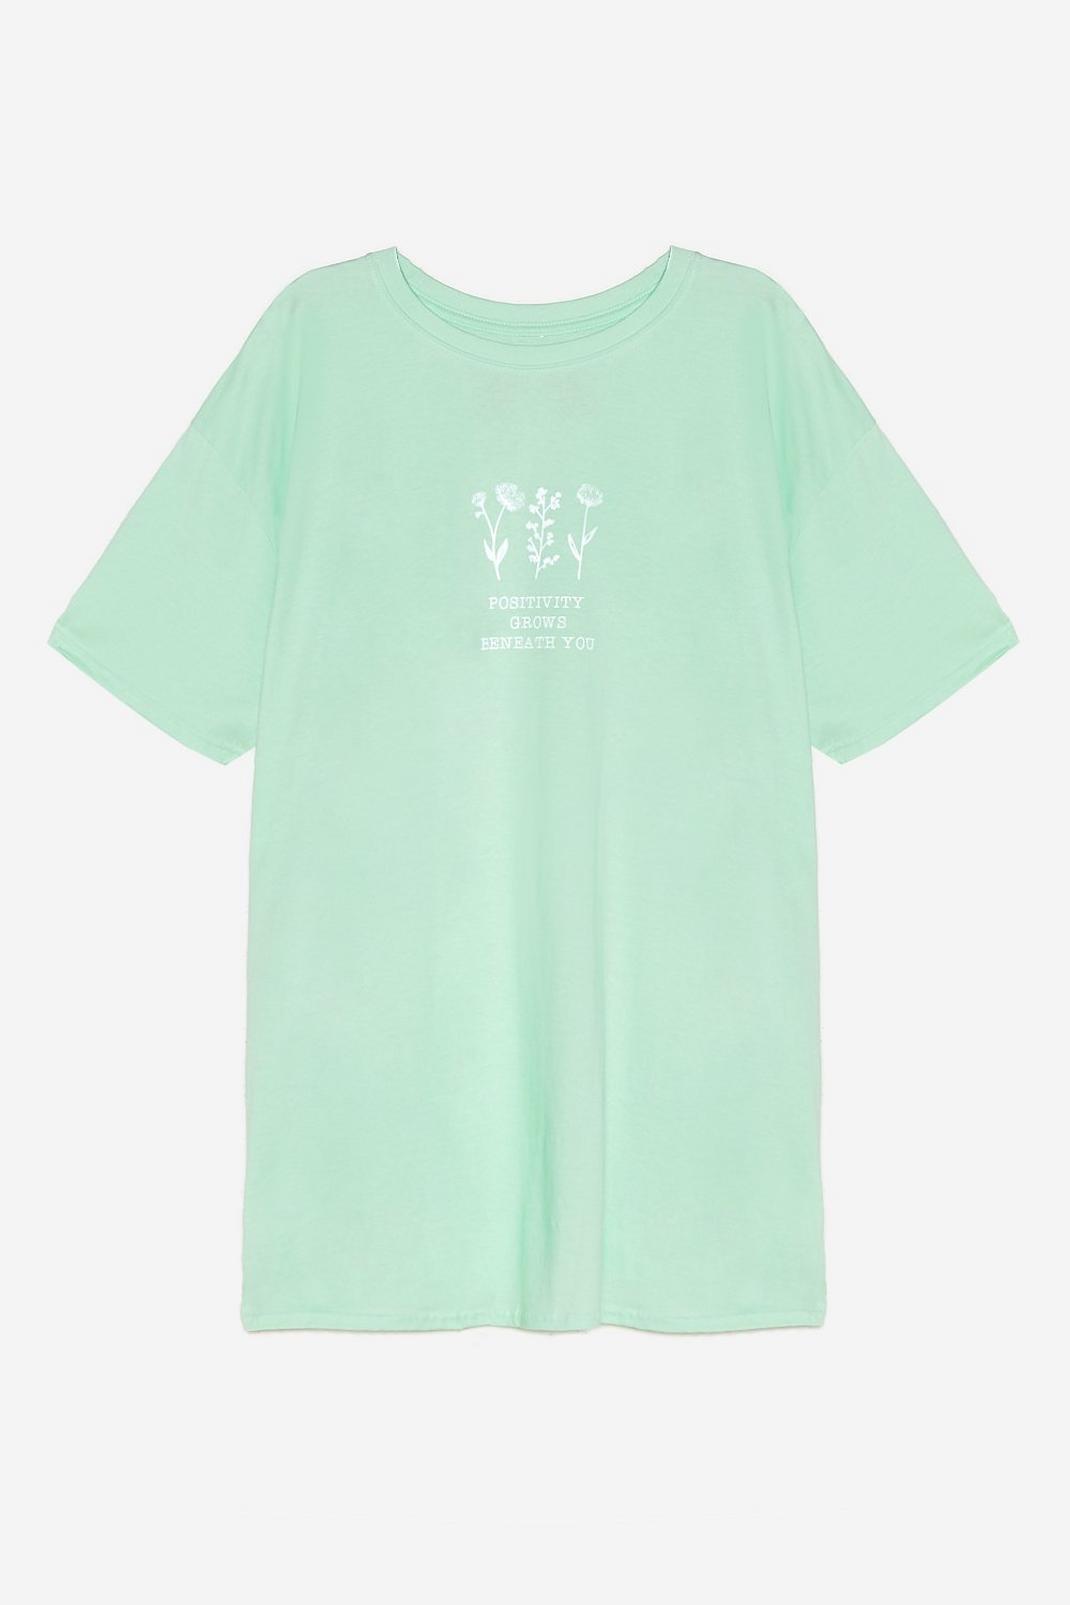 Mint Positivity Grows Floral Graphic T-Shirt image number 1